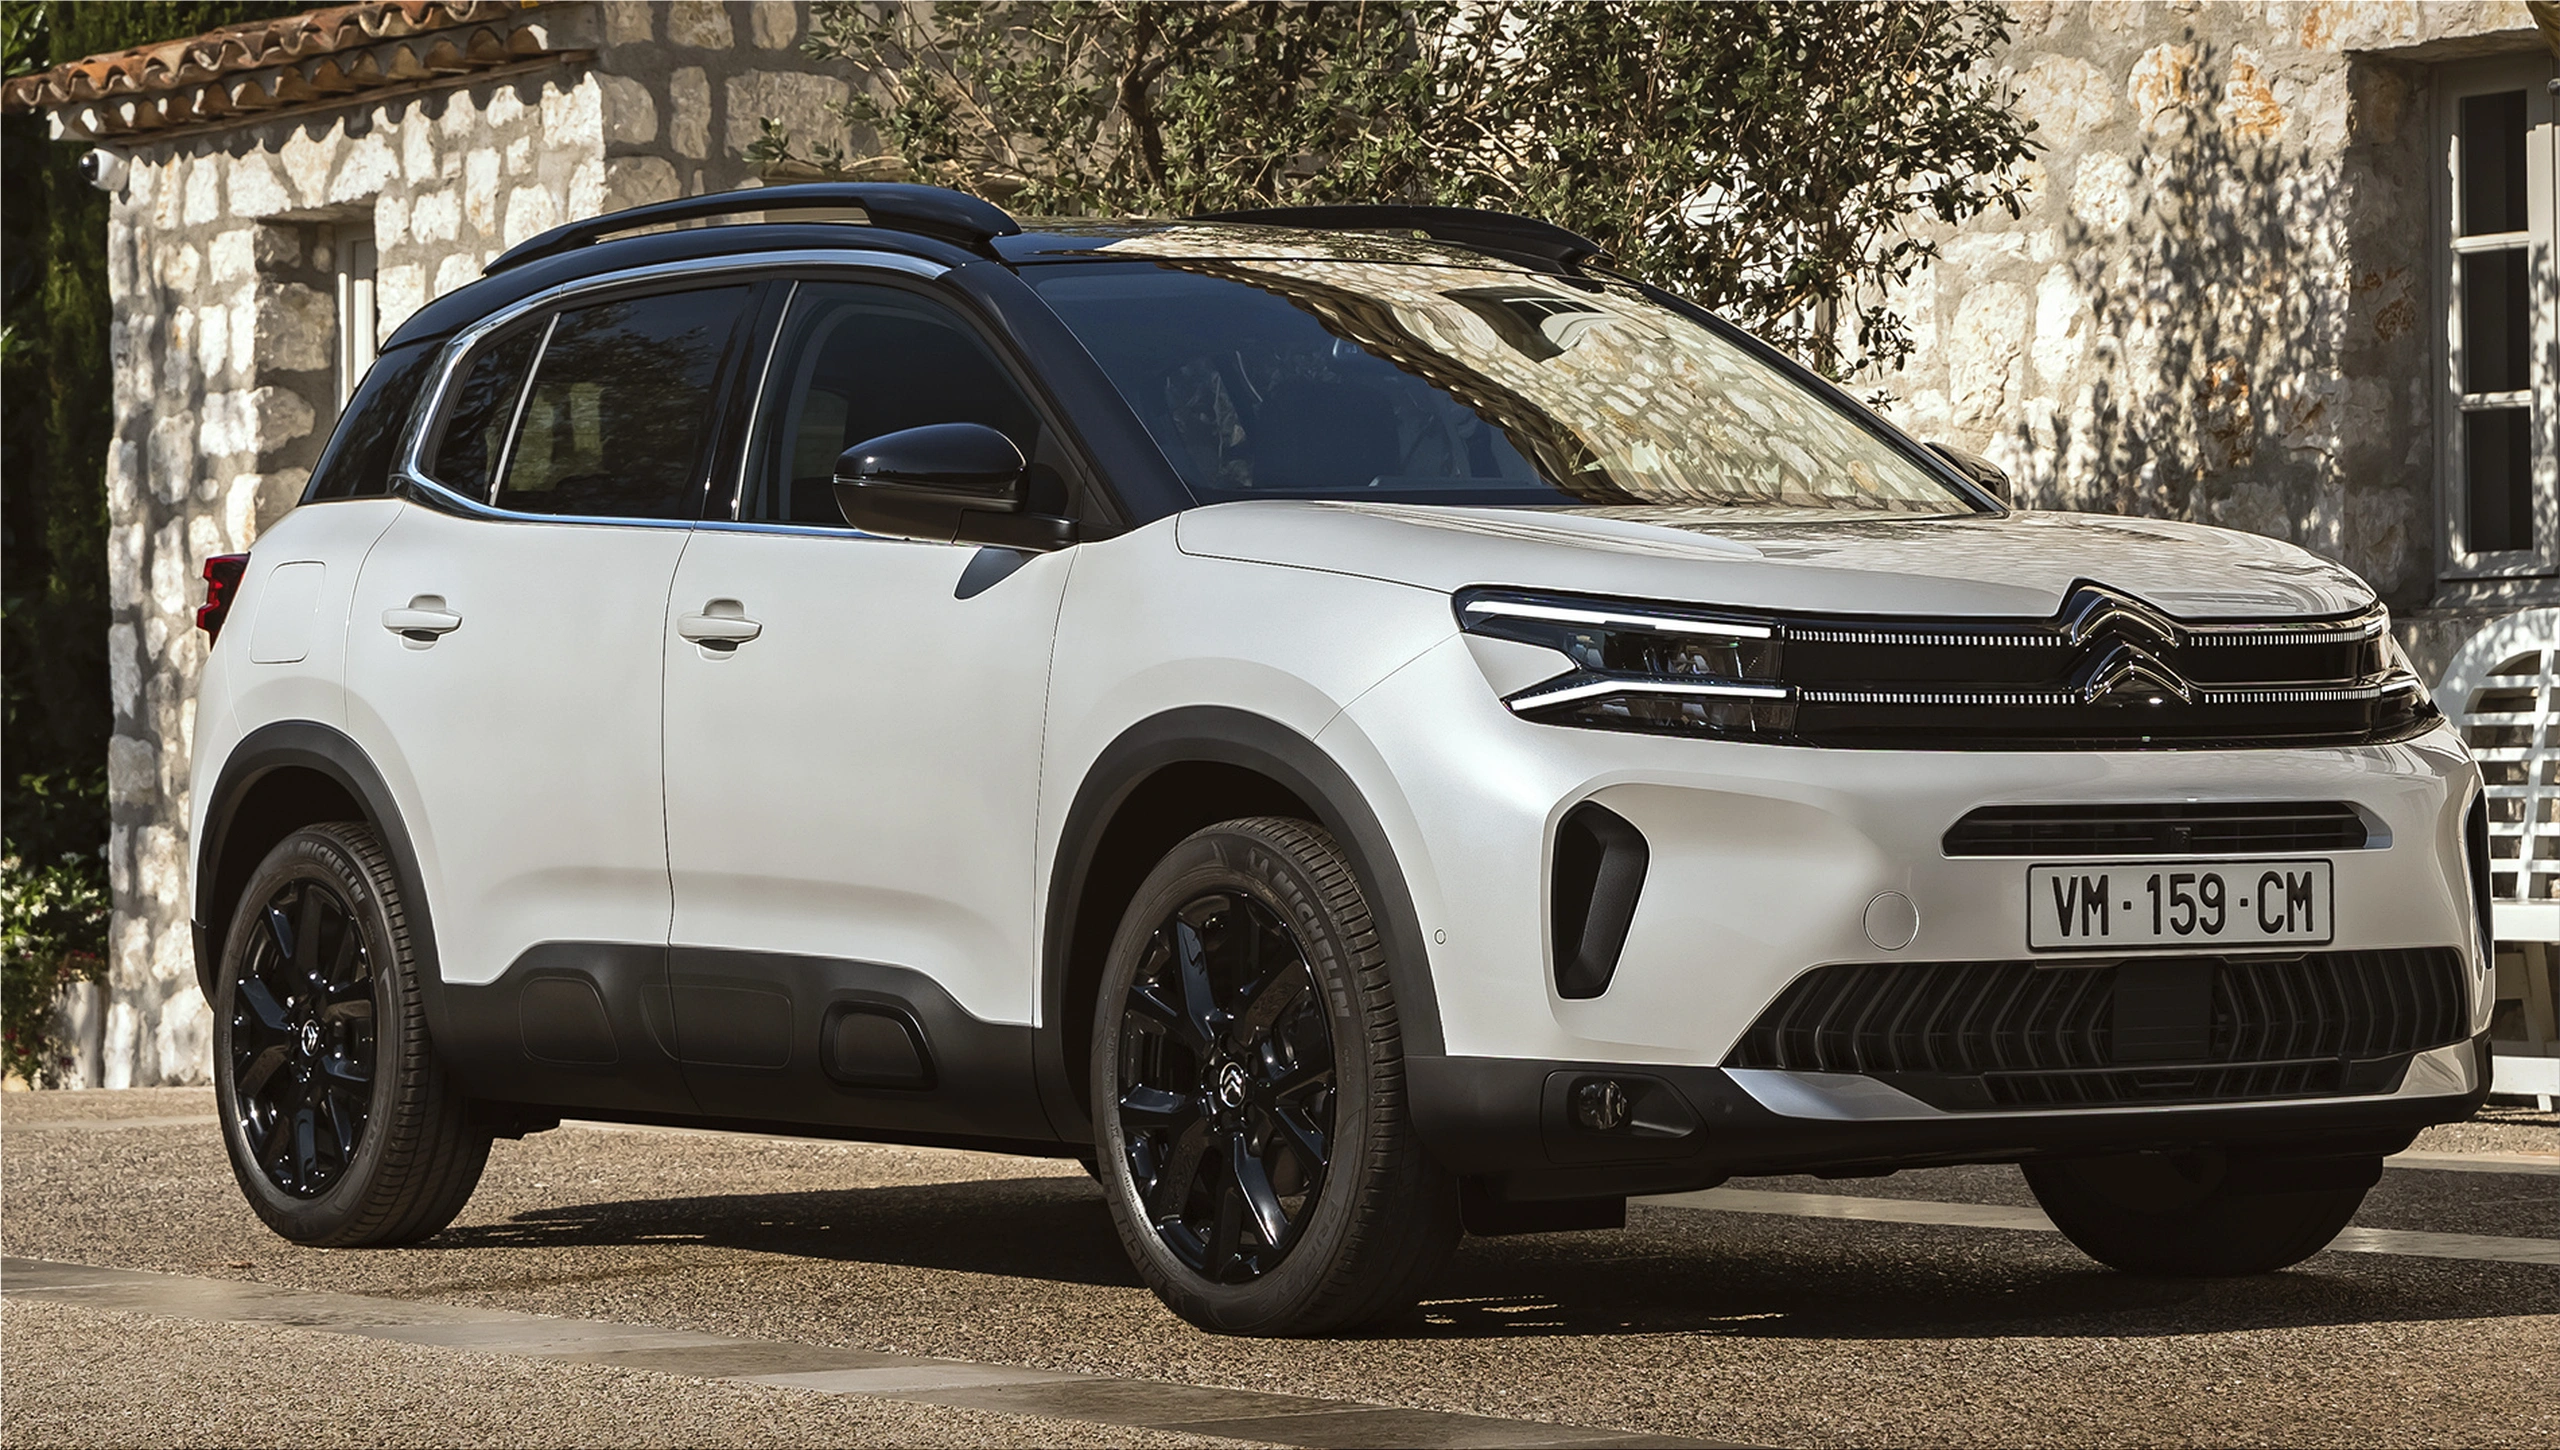 Citroen C5 Aircross facelift: prices, specification and CO2 emissions